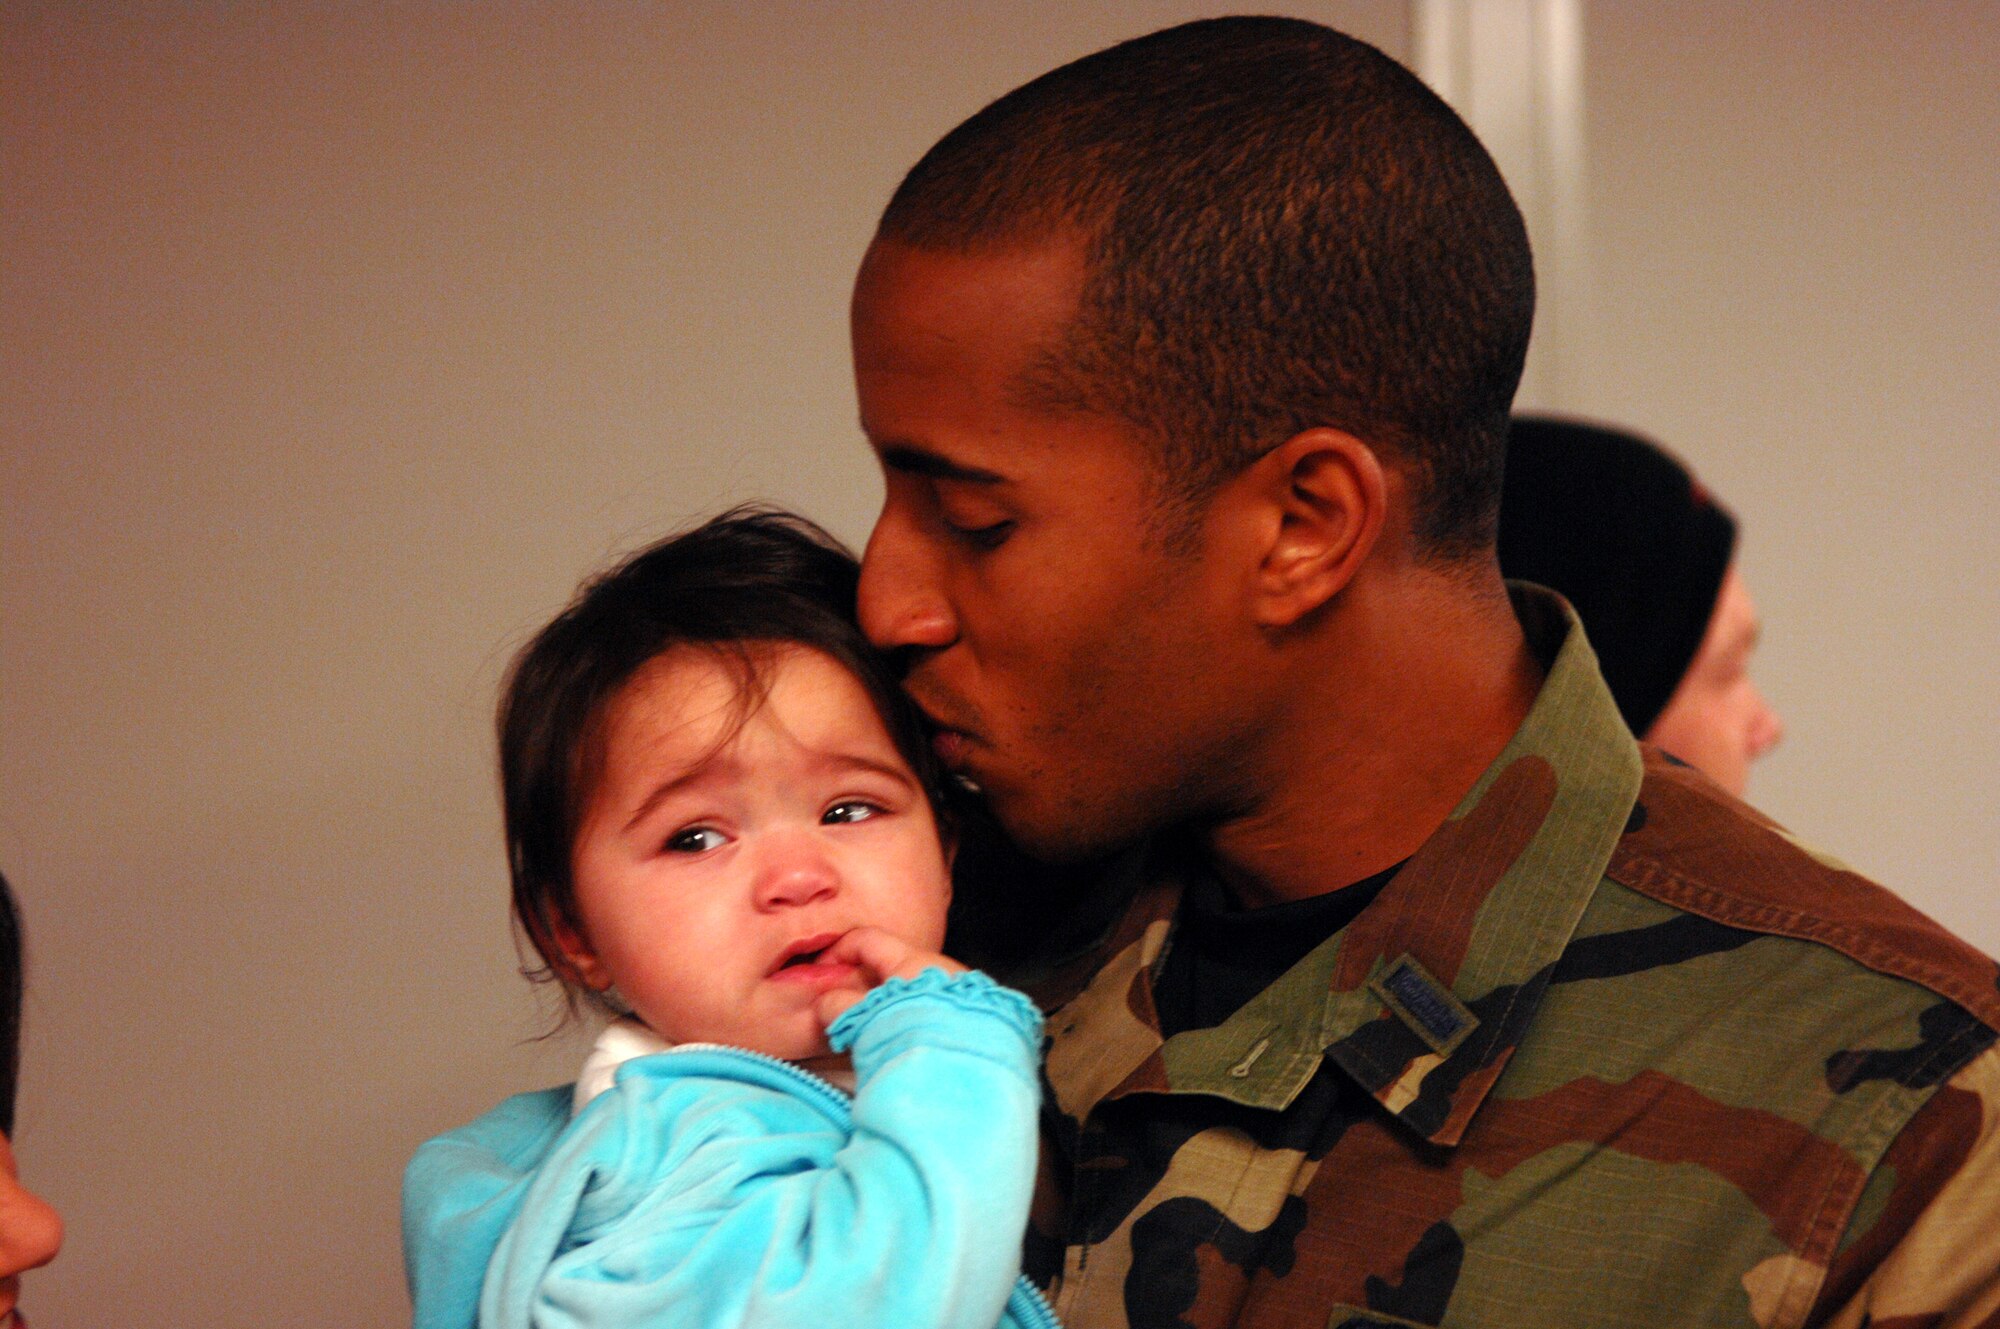 MINOT AIR FORCE BASE, N.D. -- First Lt. Dwayne Clark, 23rd Bomb Squadron, kisses his daughter Mikaila after returning from a deployment Jan. 30. Lieutenant Clark and 109 other Minot Airmen were met by friends and family upon arriving home from a five-month deployment to Andersen Air Force Base, Guam. (U.S. Air Force photo by Airman 1st Class Christopher Boitz) 